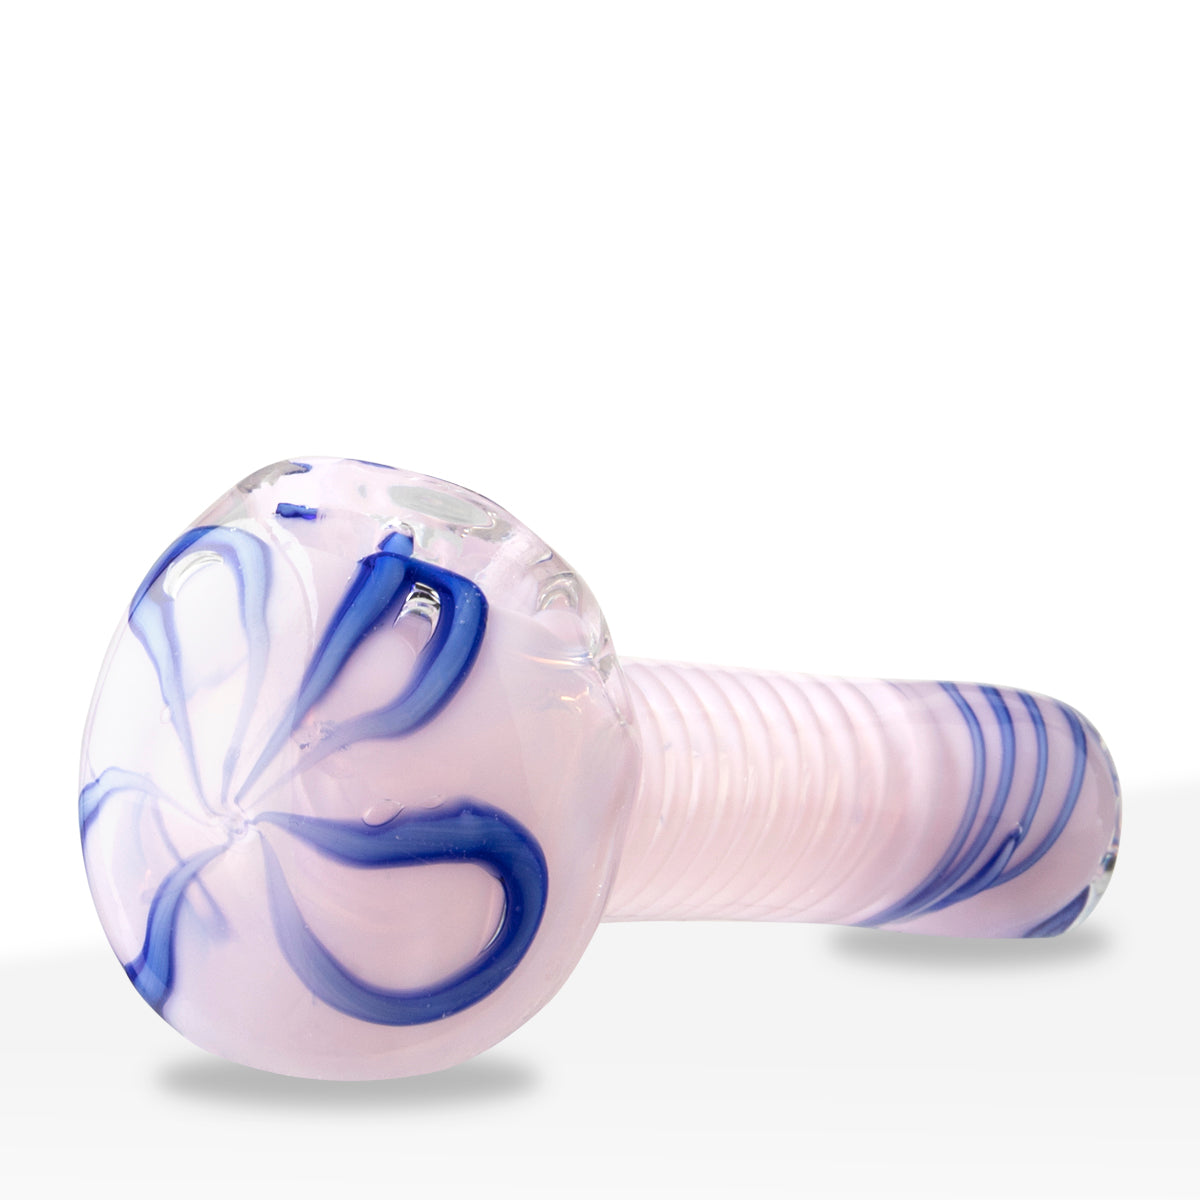 Hand Pipe | Classic Glass Spoon Slyme Swirl Hand Pipe | 3.5" - Glass - 3 Pack